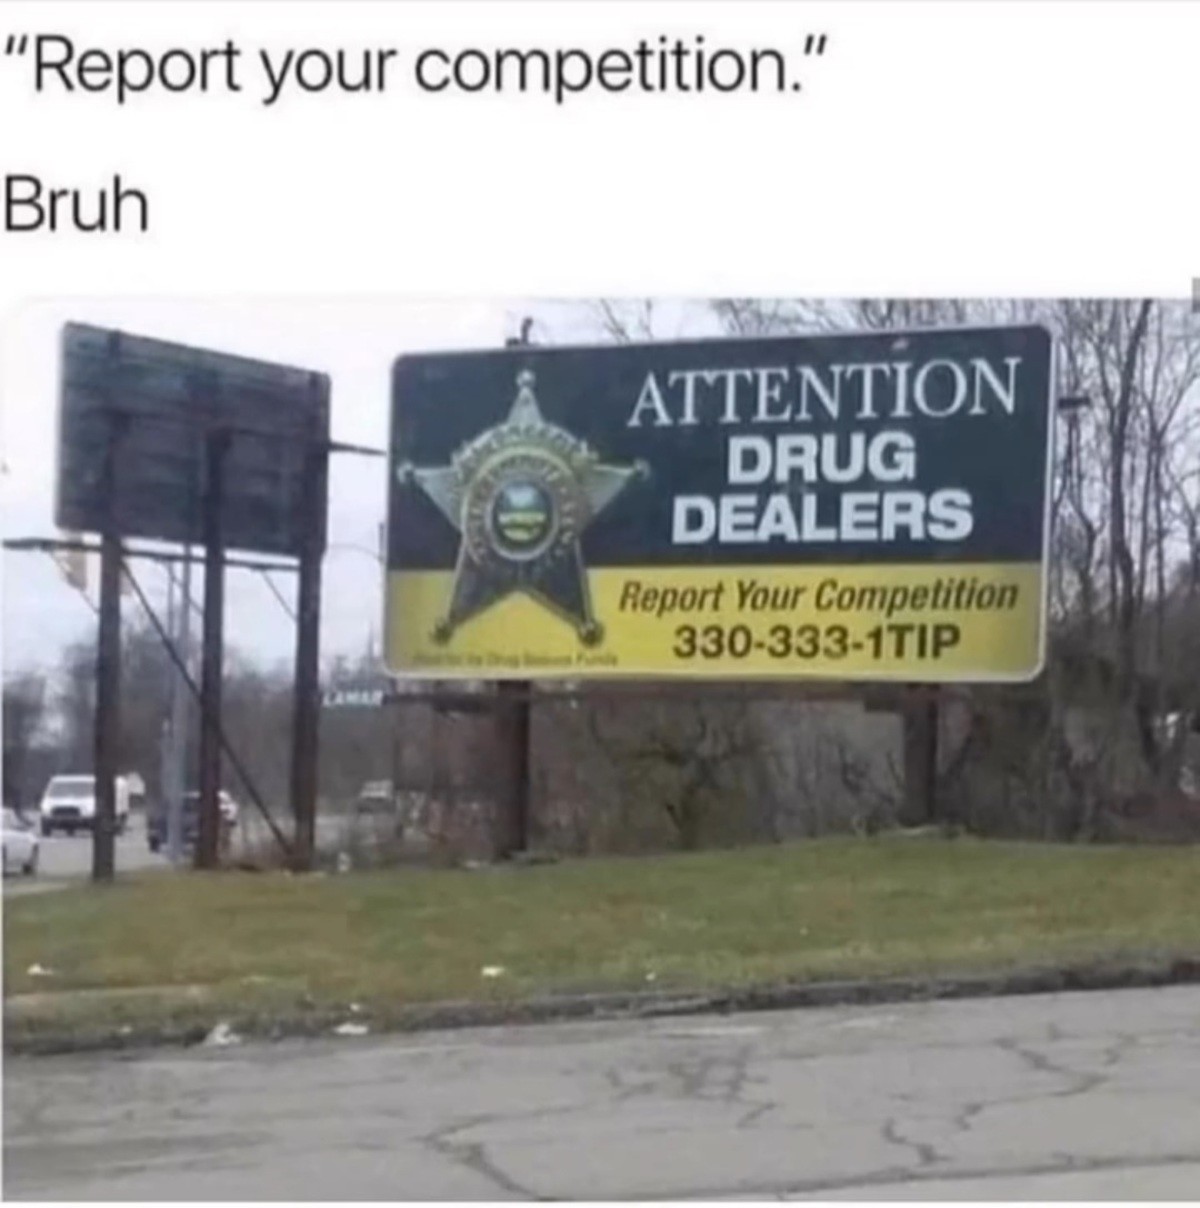 competition.jpg